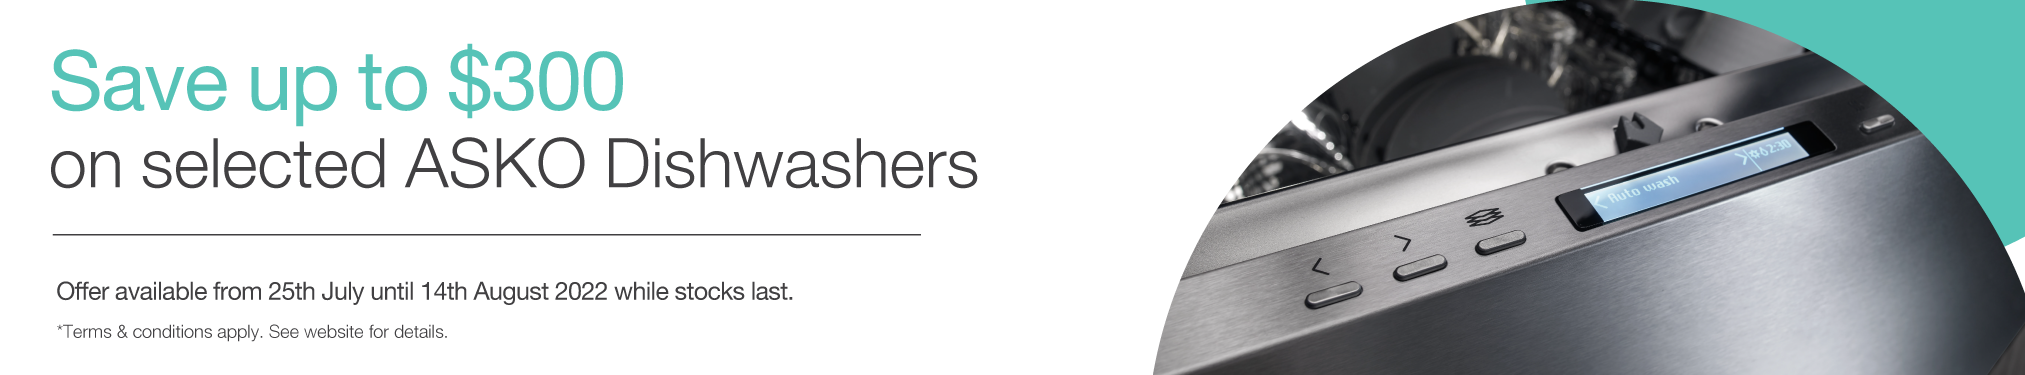 Save up to $300 on selected ASKO Dishwashers